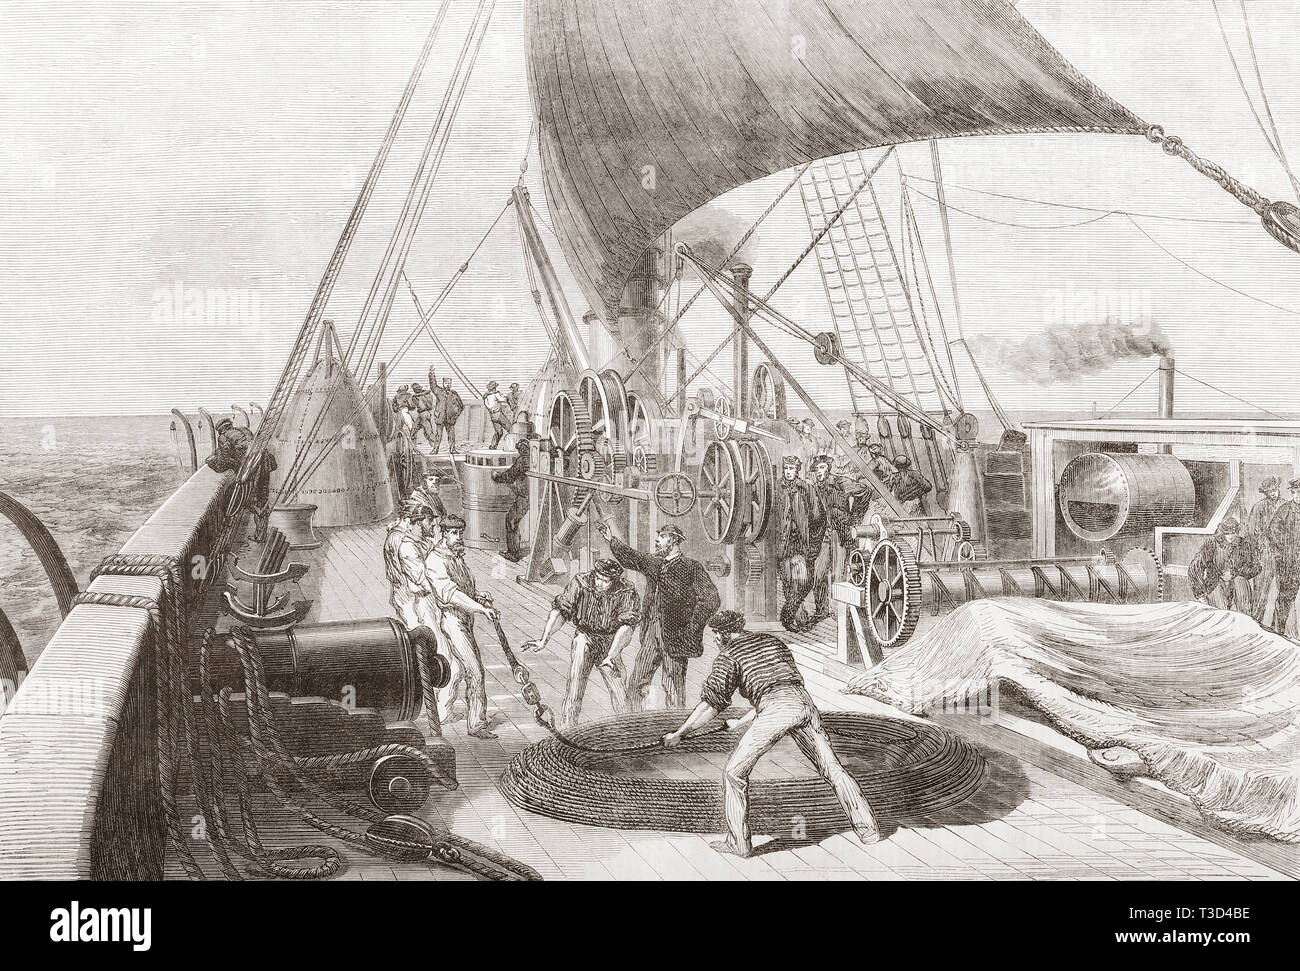 Preparing for the final attempt to grapple the lost Atlantic telegraph cable on board The Great Eastern.  From The Illustrated London News, published 1865. Stock Photo